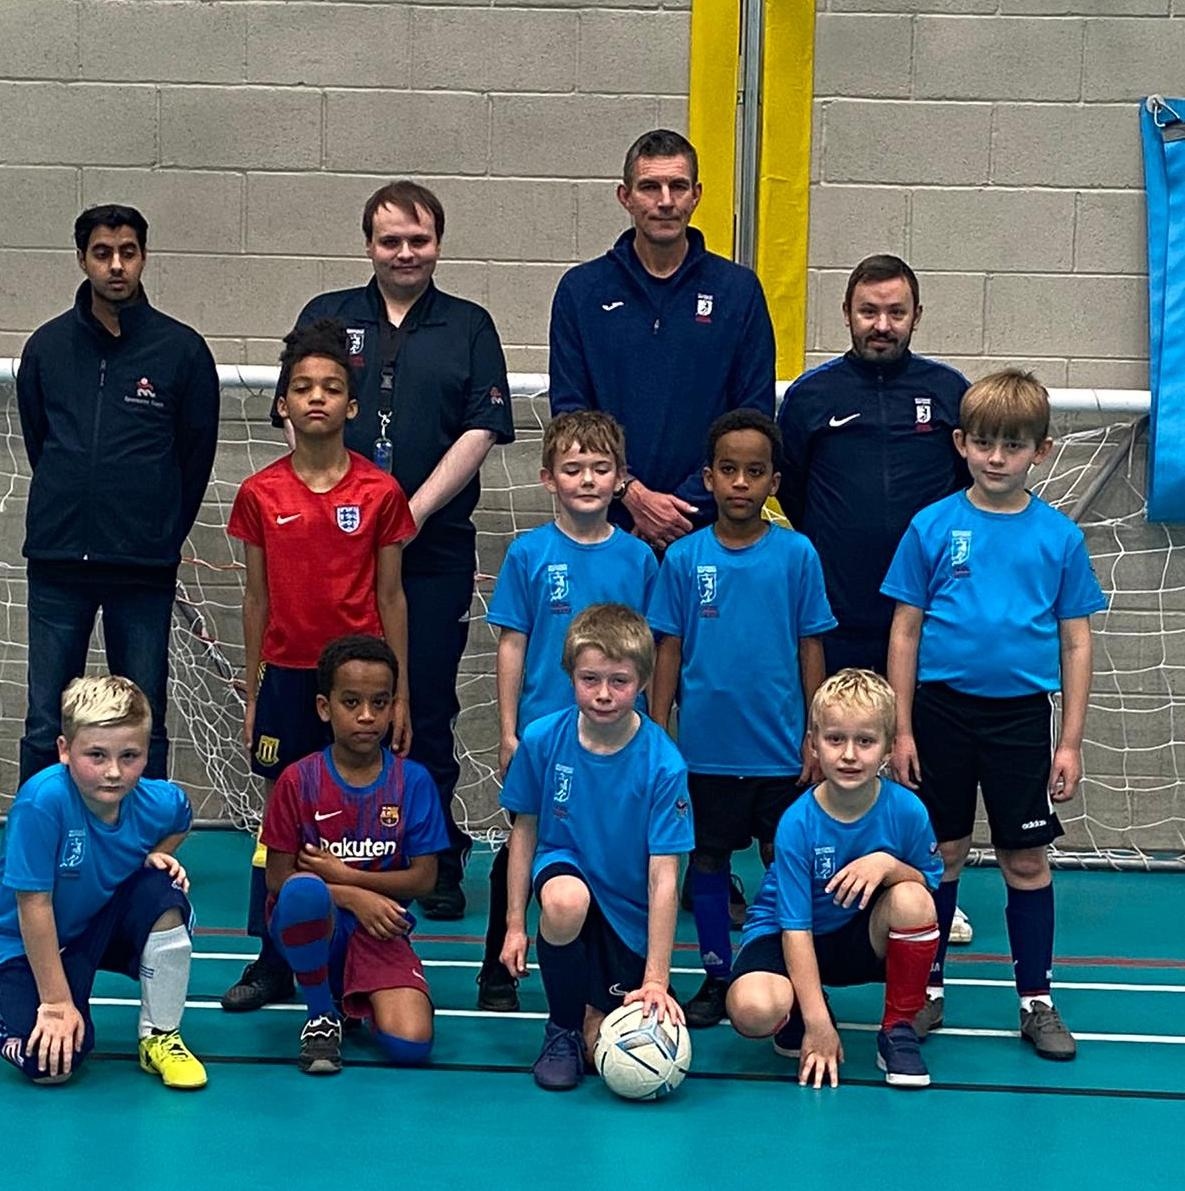 Our football coaching at Ormiston Sir Stanley Matthews Academy is still going strong. Here is the next generation of footballers coached by our reliable SSMF coaches - Alan, Andy, Nathan & Ahmed. #stanleymatthews #footballacademy #ormiston #footballcoaching #sportstraining